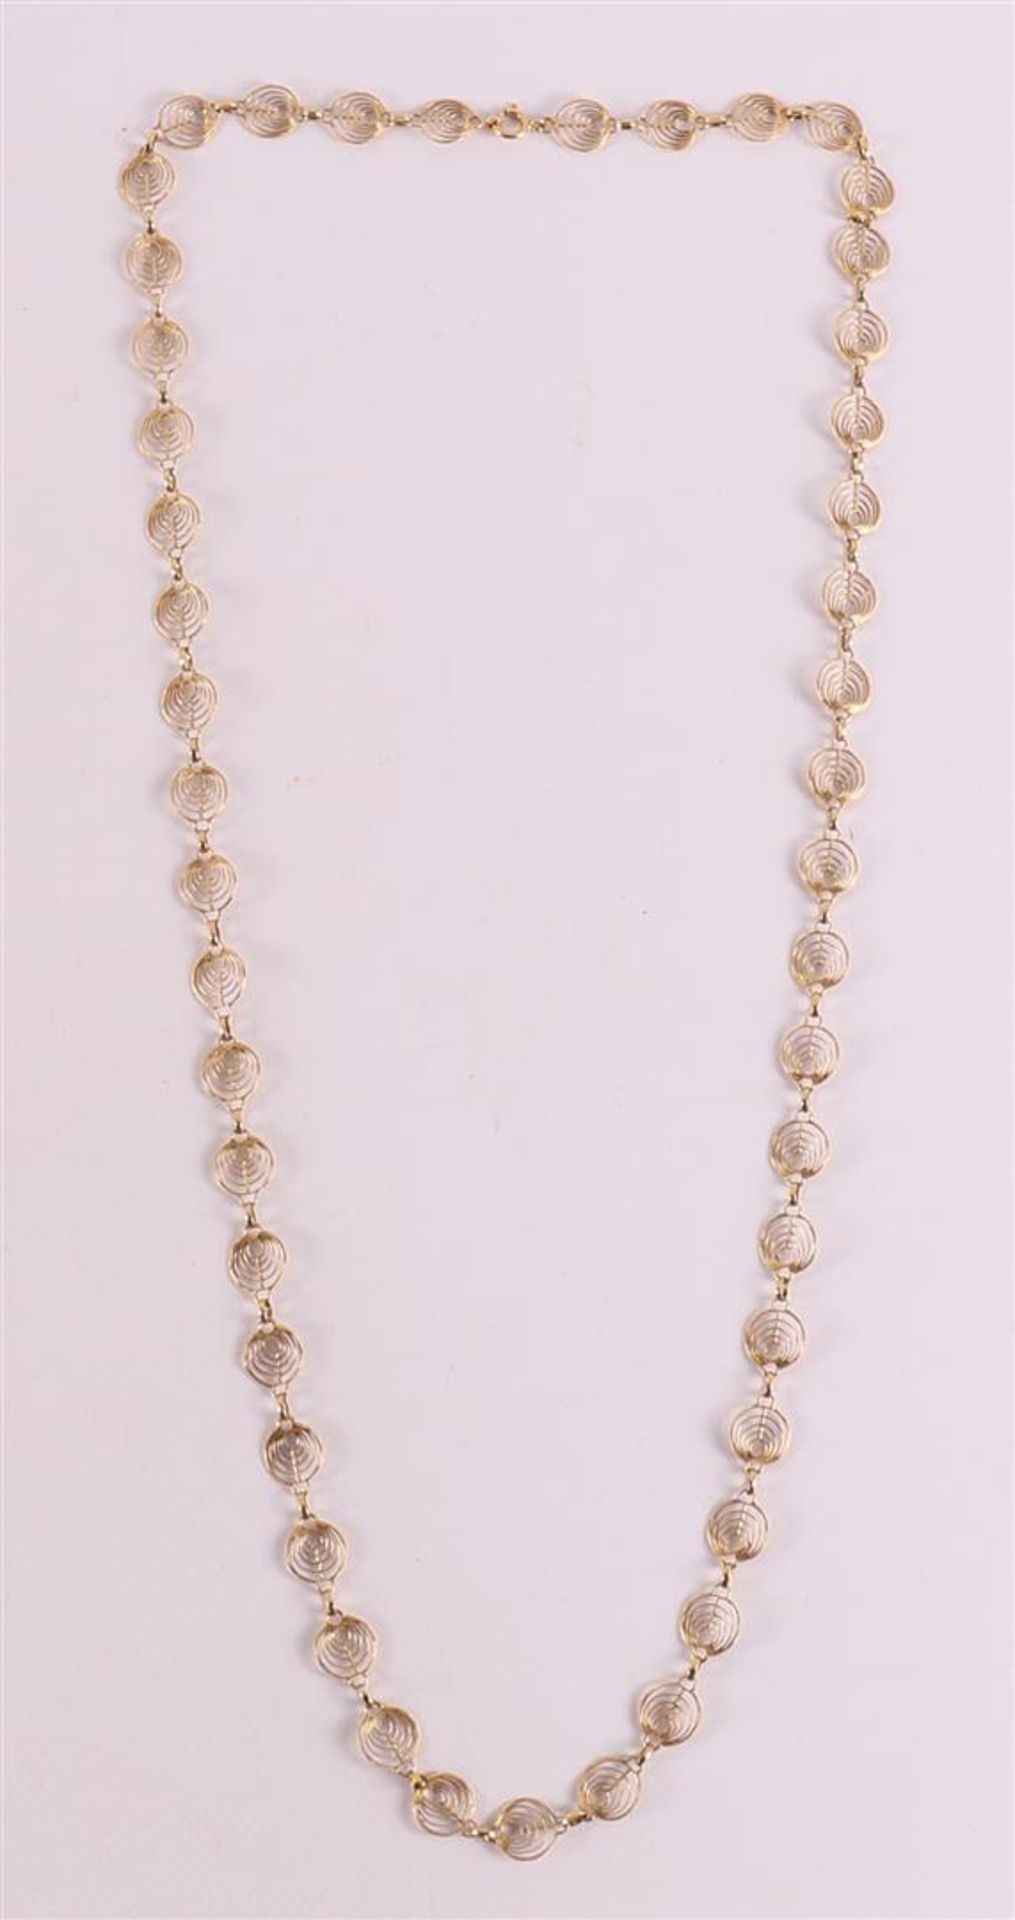 An 18 kt 750/1000 gold necklace with concentric circles.